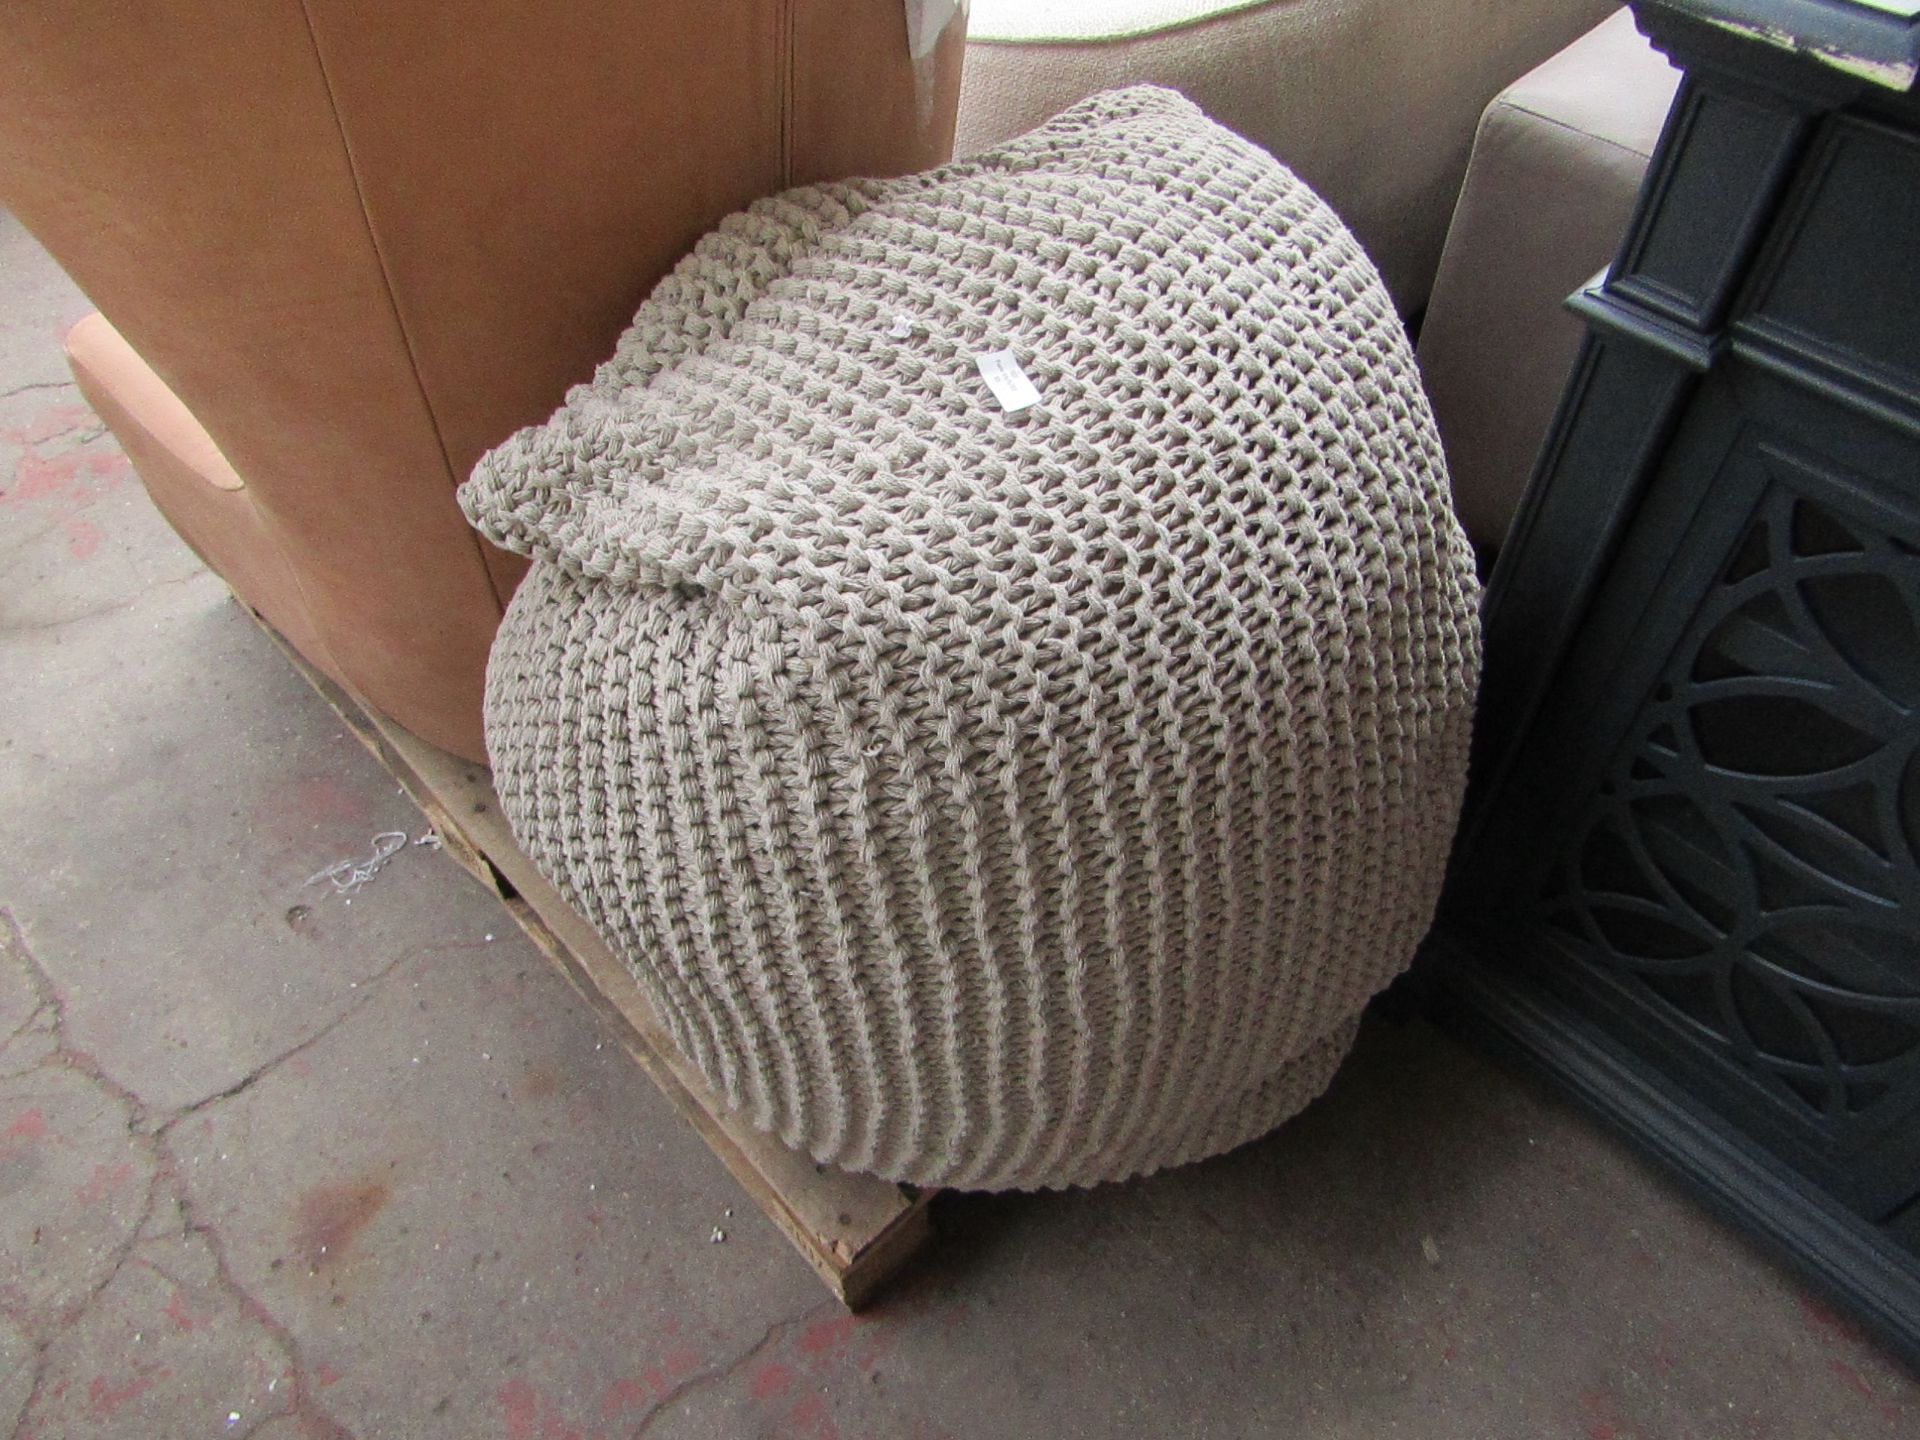 | 1x | MADE.COM AKI KNIT WOOL BEANBAG | UNCHECKED & UNBOXED | RRP £100 |